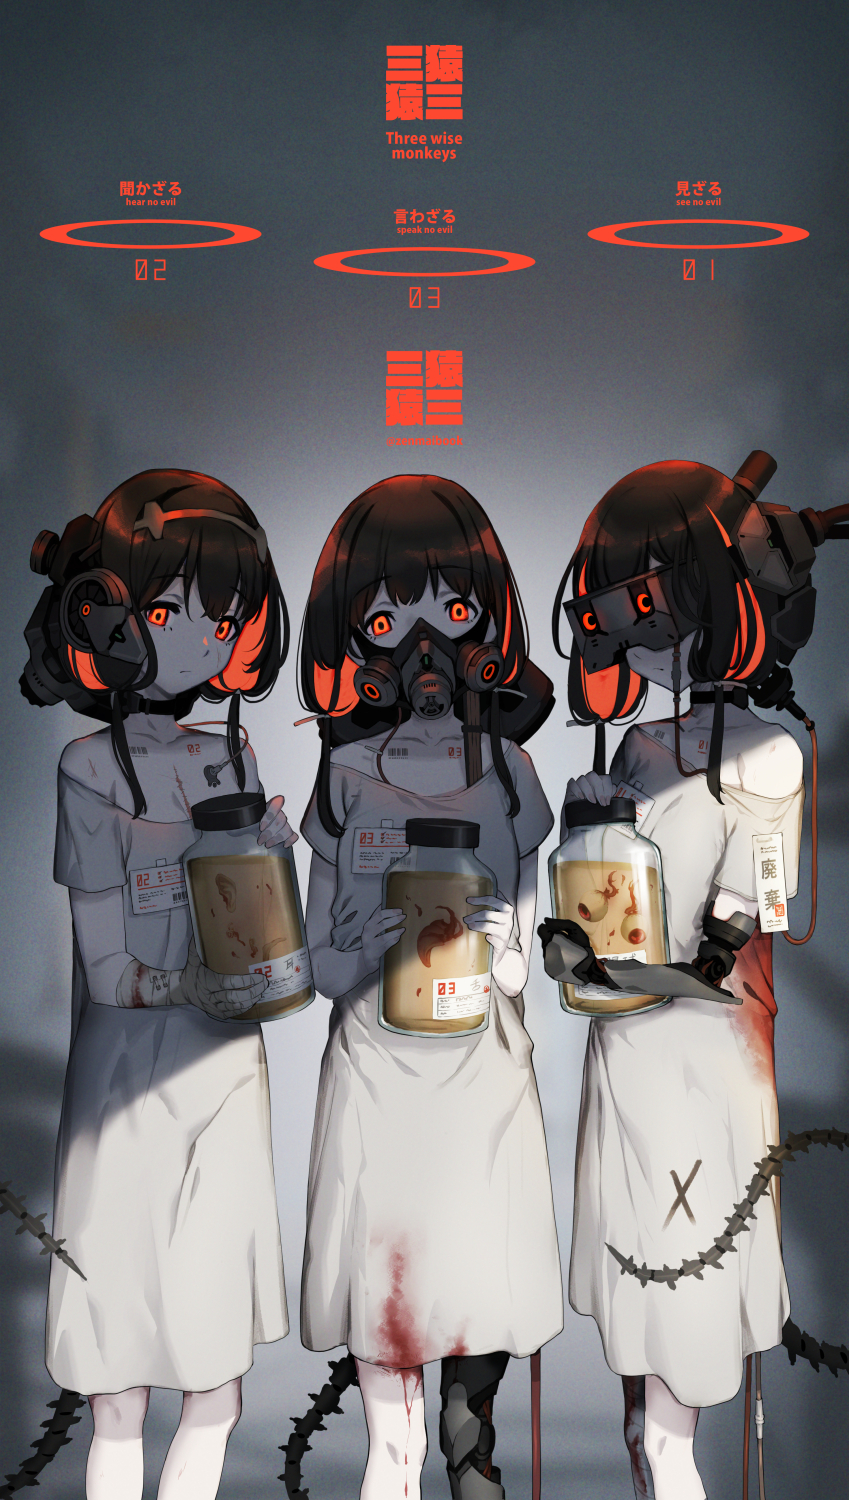 3girls artificial_eye bandaged_hand barcode_tattoo bare_shoulders blood bloody_clothes brown_hair commentary cyborg ear english_text eyeball feet_out_of_frame gas_mask glowing glowing_eyes hairband head_mounted_display highres holding_jar hospital_gown id_card jar mechanical_arm mechanical_leg mechanical_parts multiple_girls number_tattoo off_shoulder original red_eyes scar shadow surgical_scar tail tattoo tongue twitter_username zenmaibook